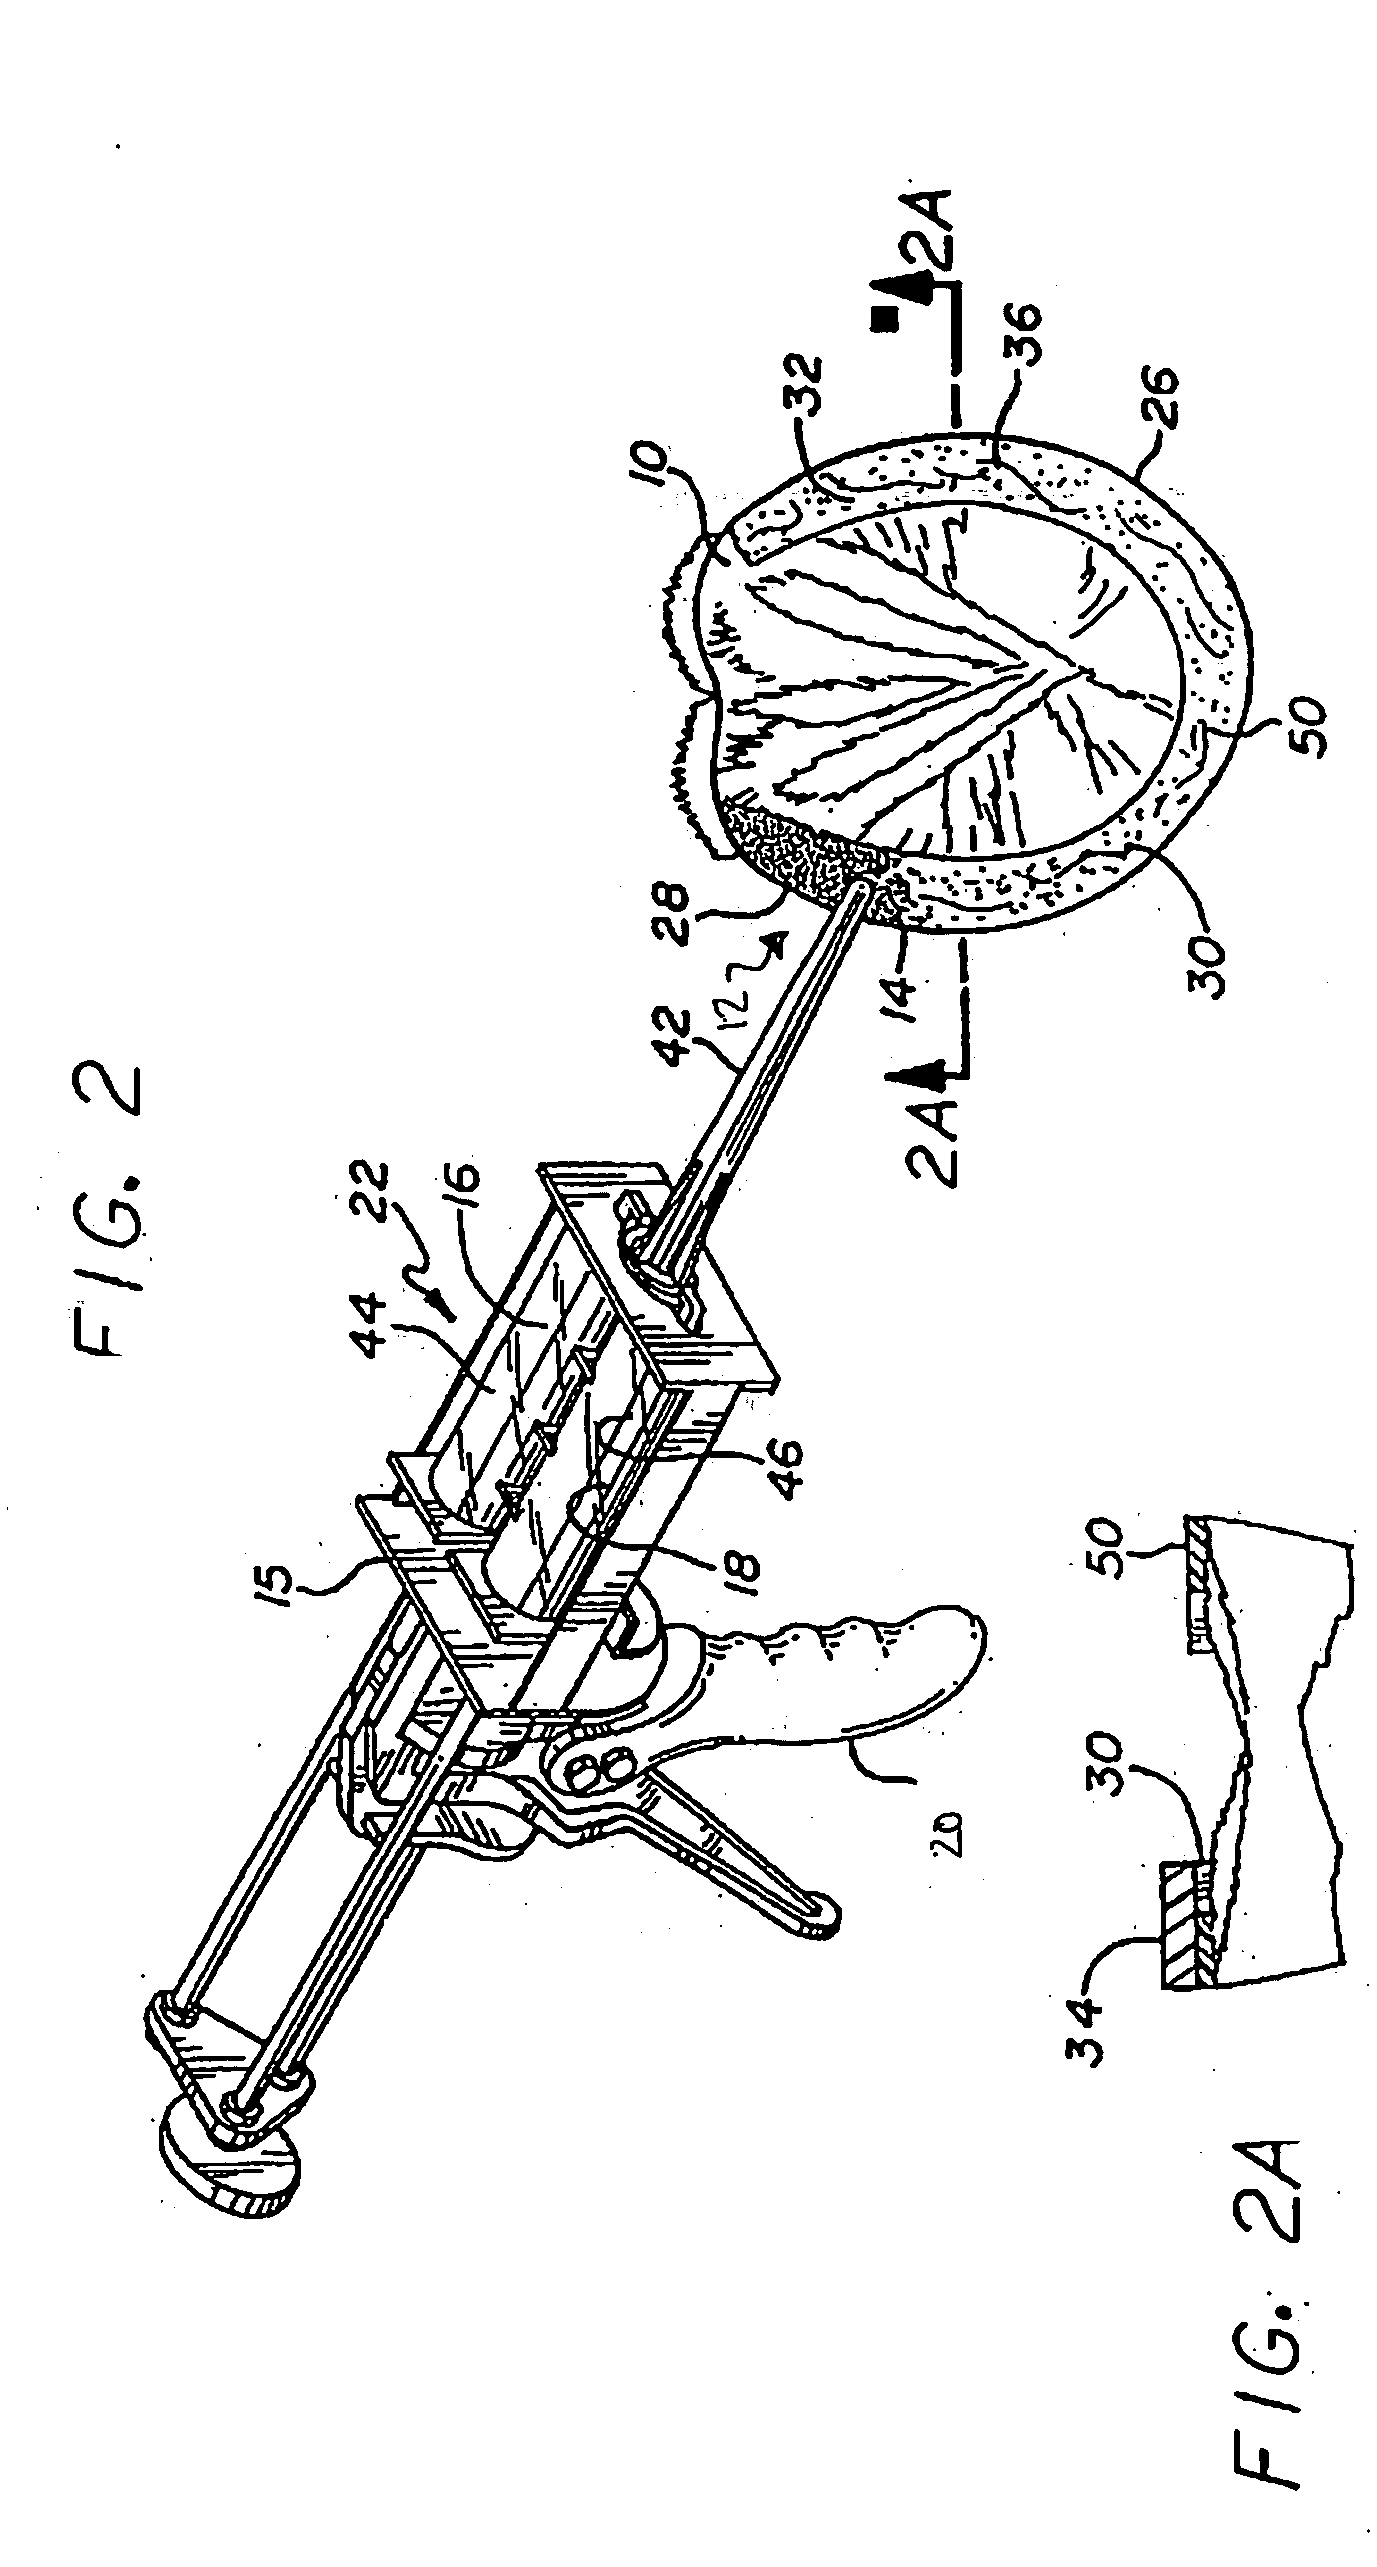 Method and apparatus for in situ and molded horseshoeing